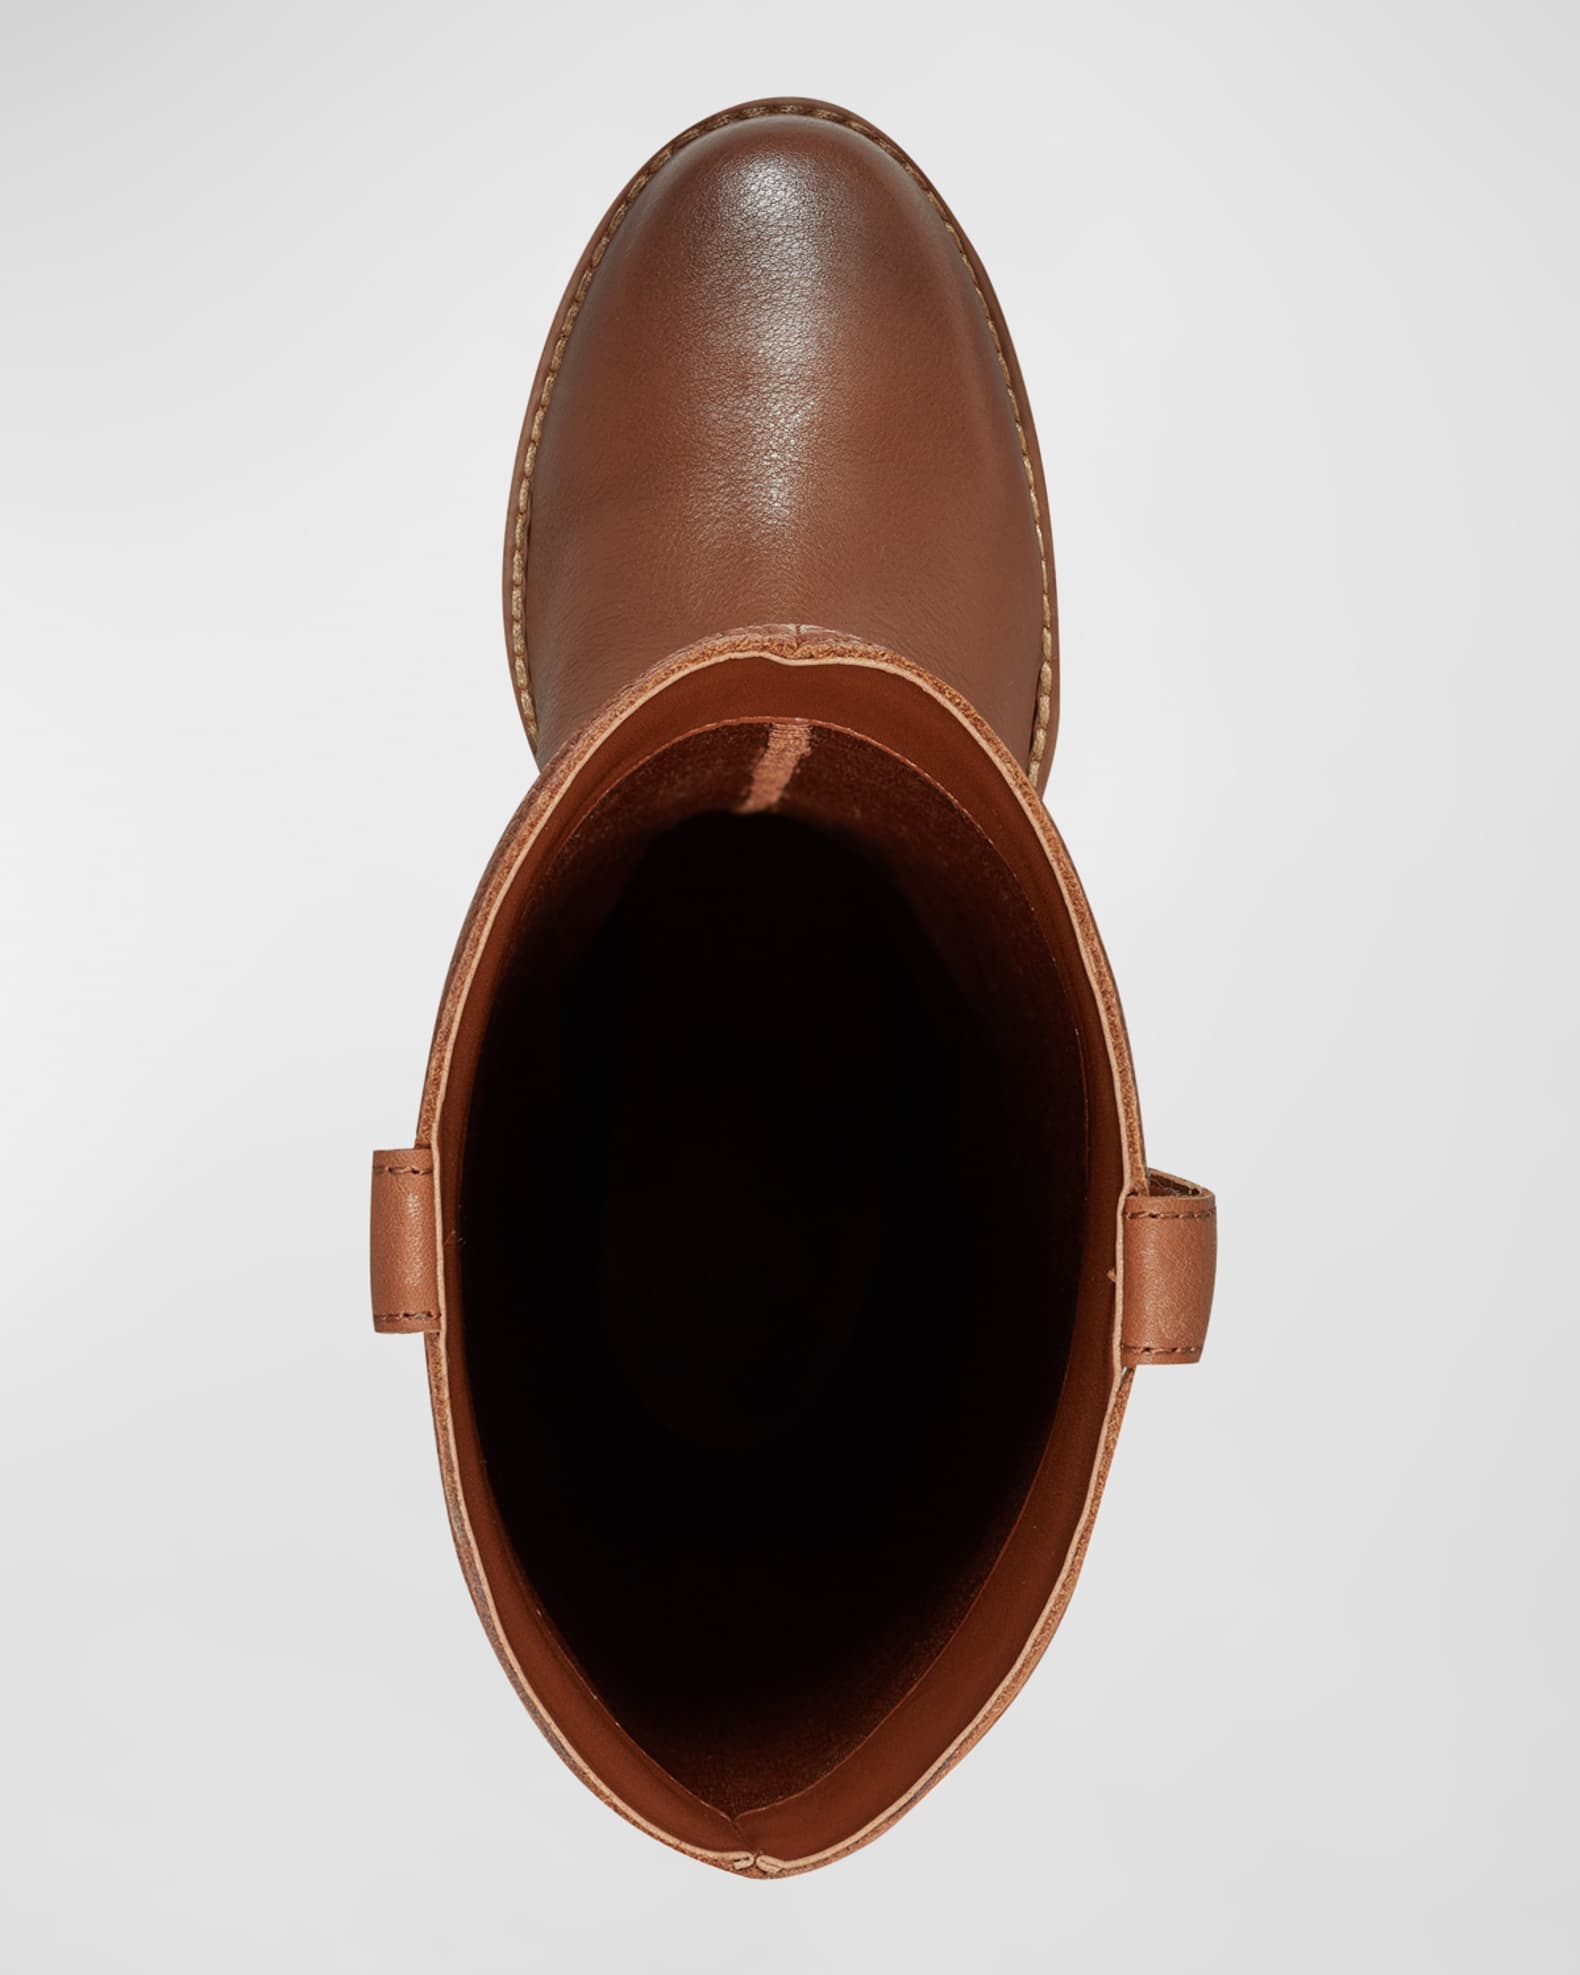 Marc Fisher LTD Hydria Leather Riding Boots | Neiman Marcus